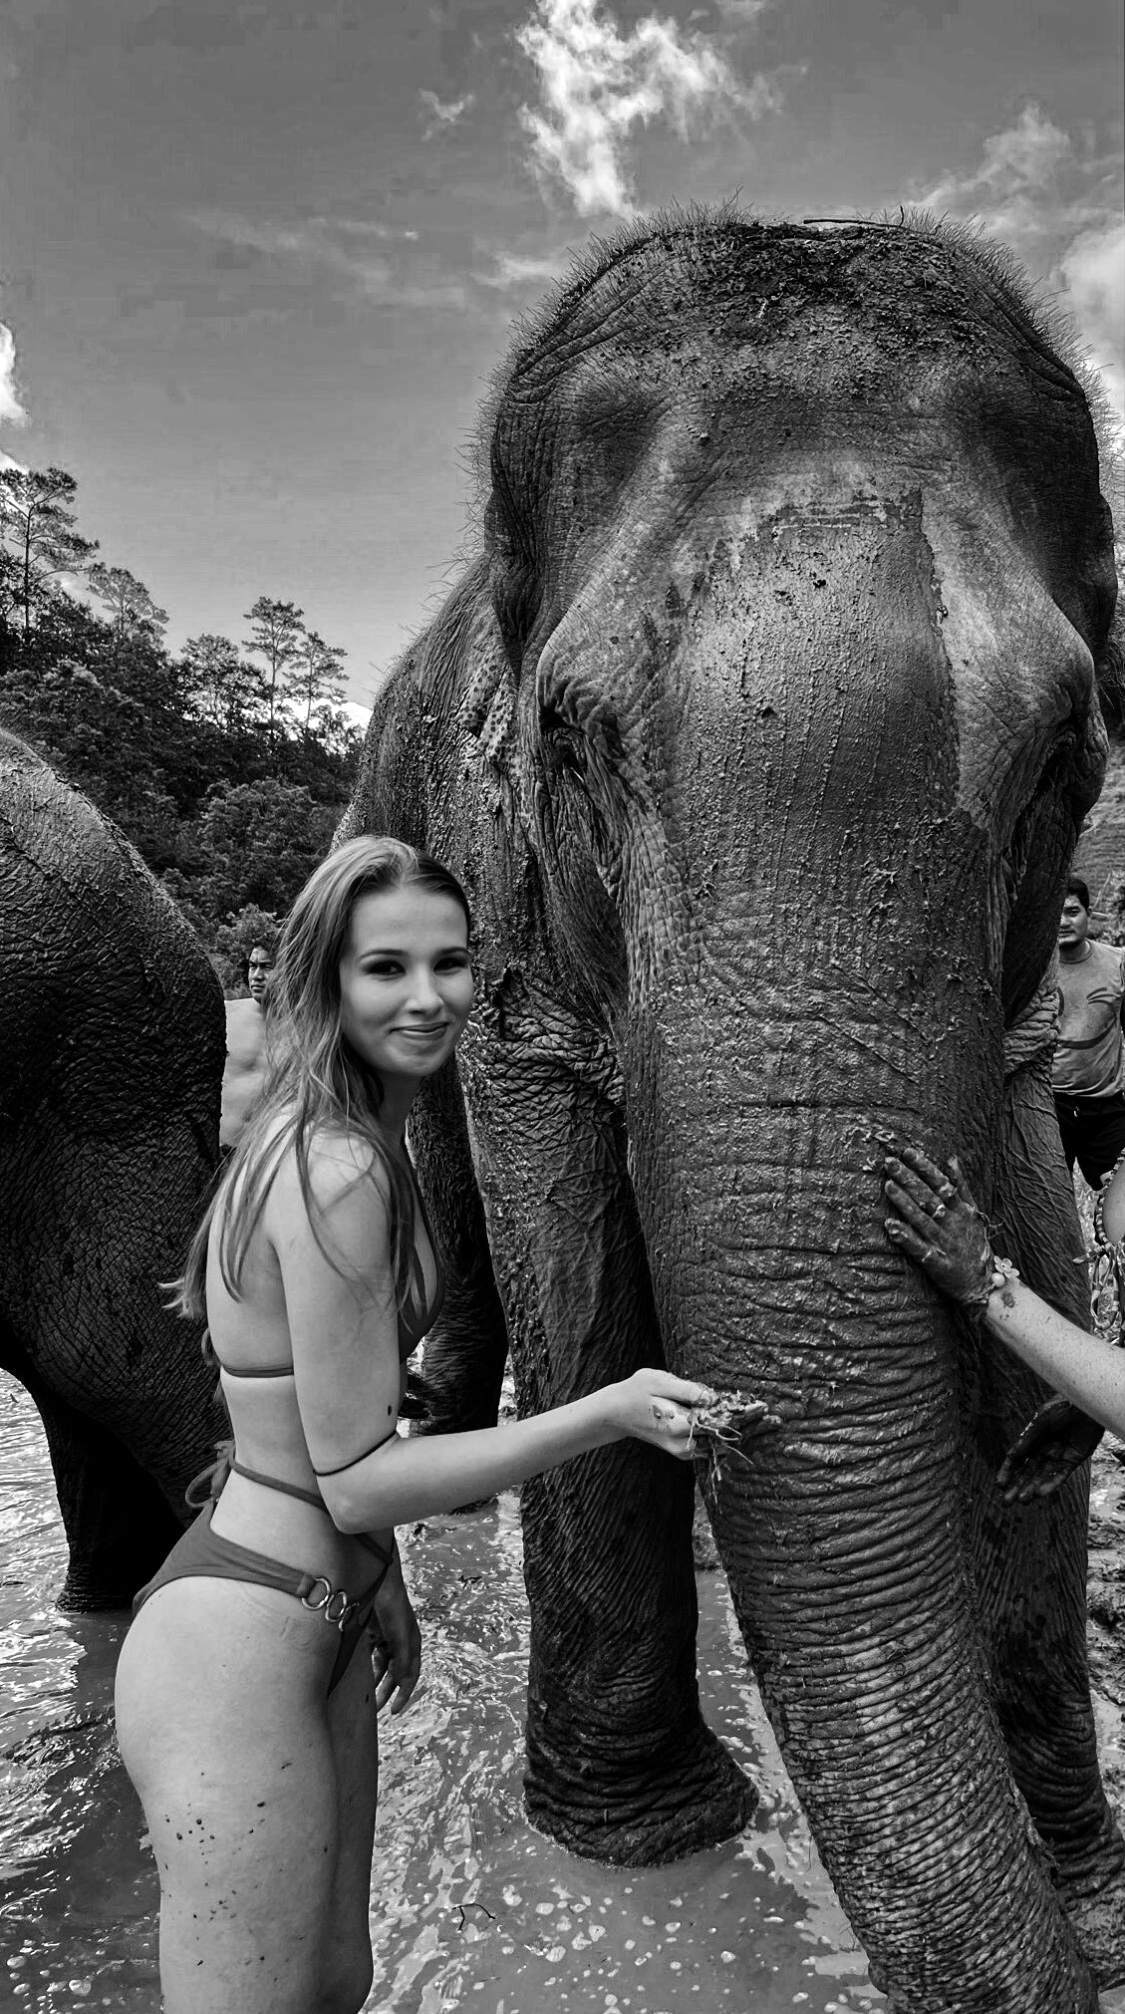 Jungle trekking and playing with elephants in Chiang Mai – Thailand Travel Diary